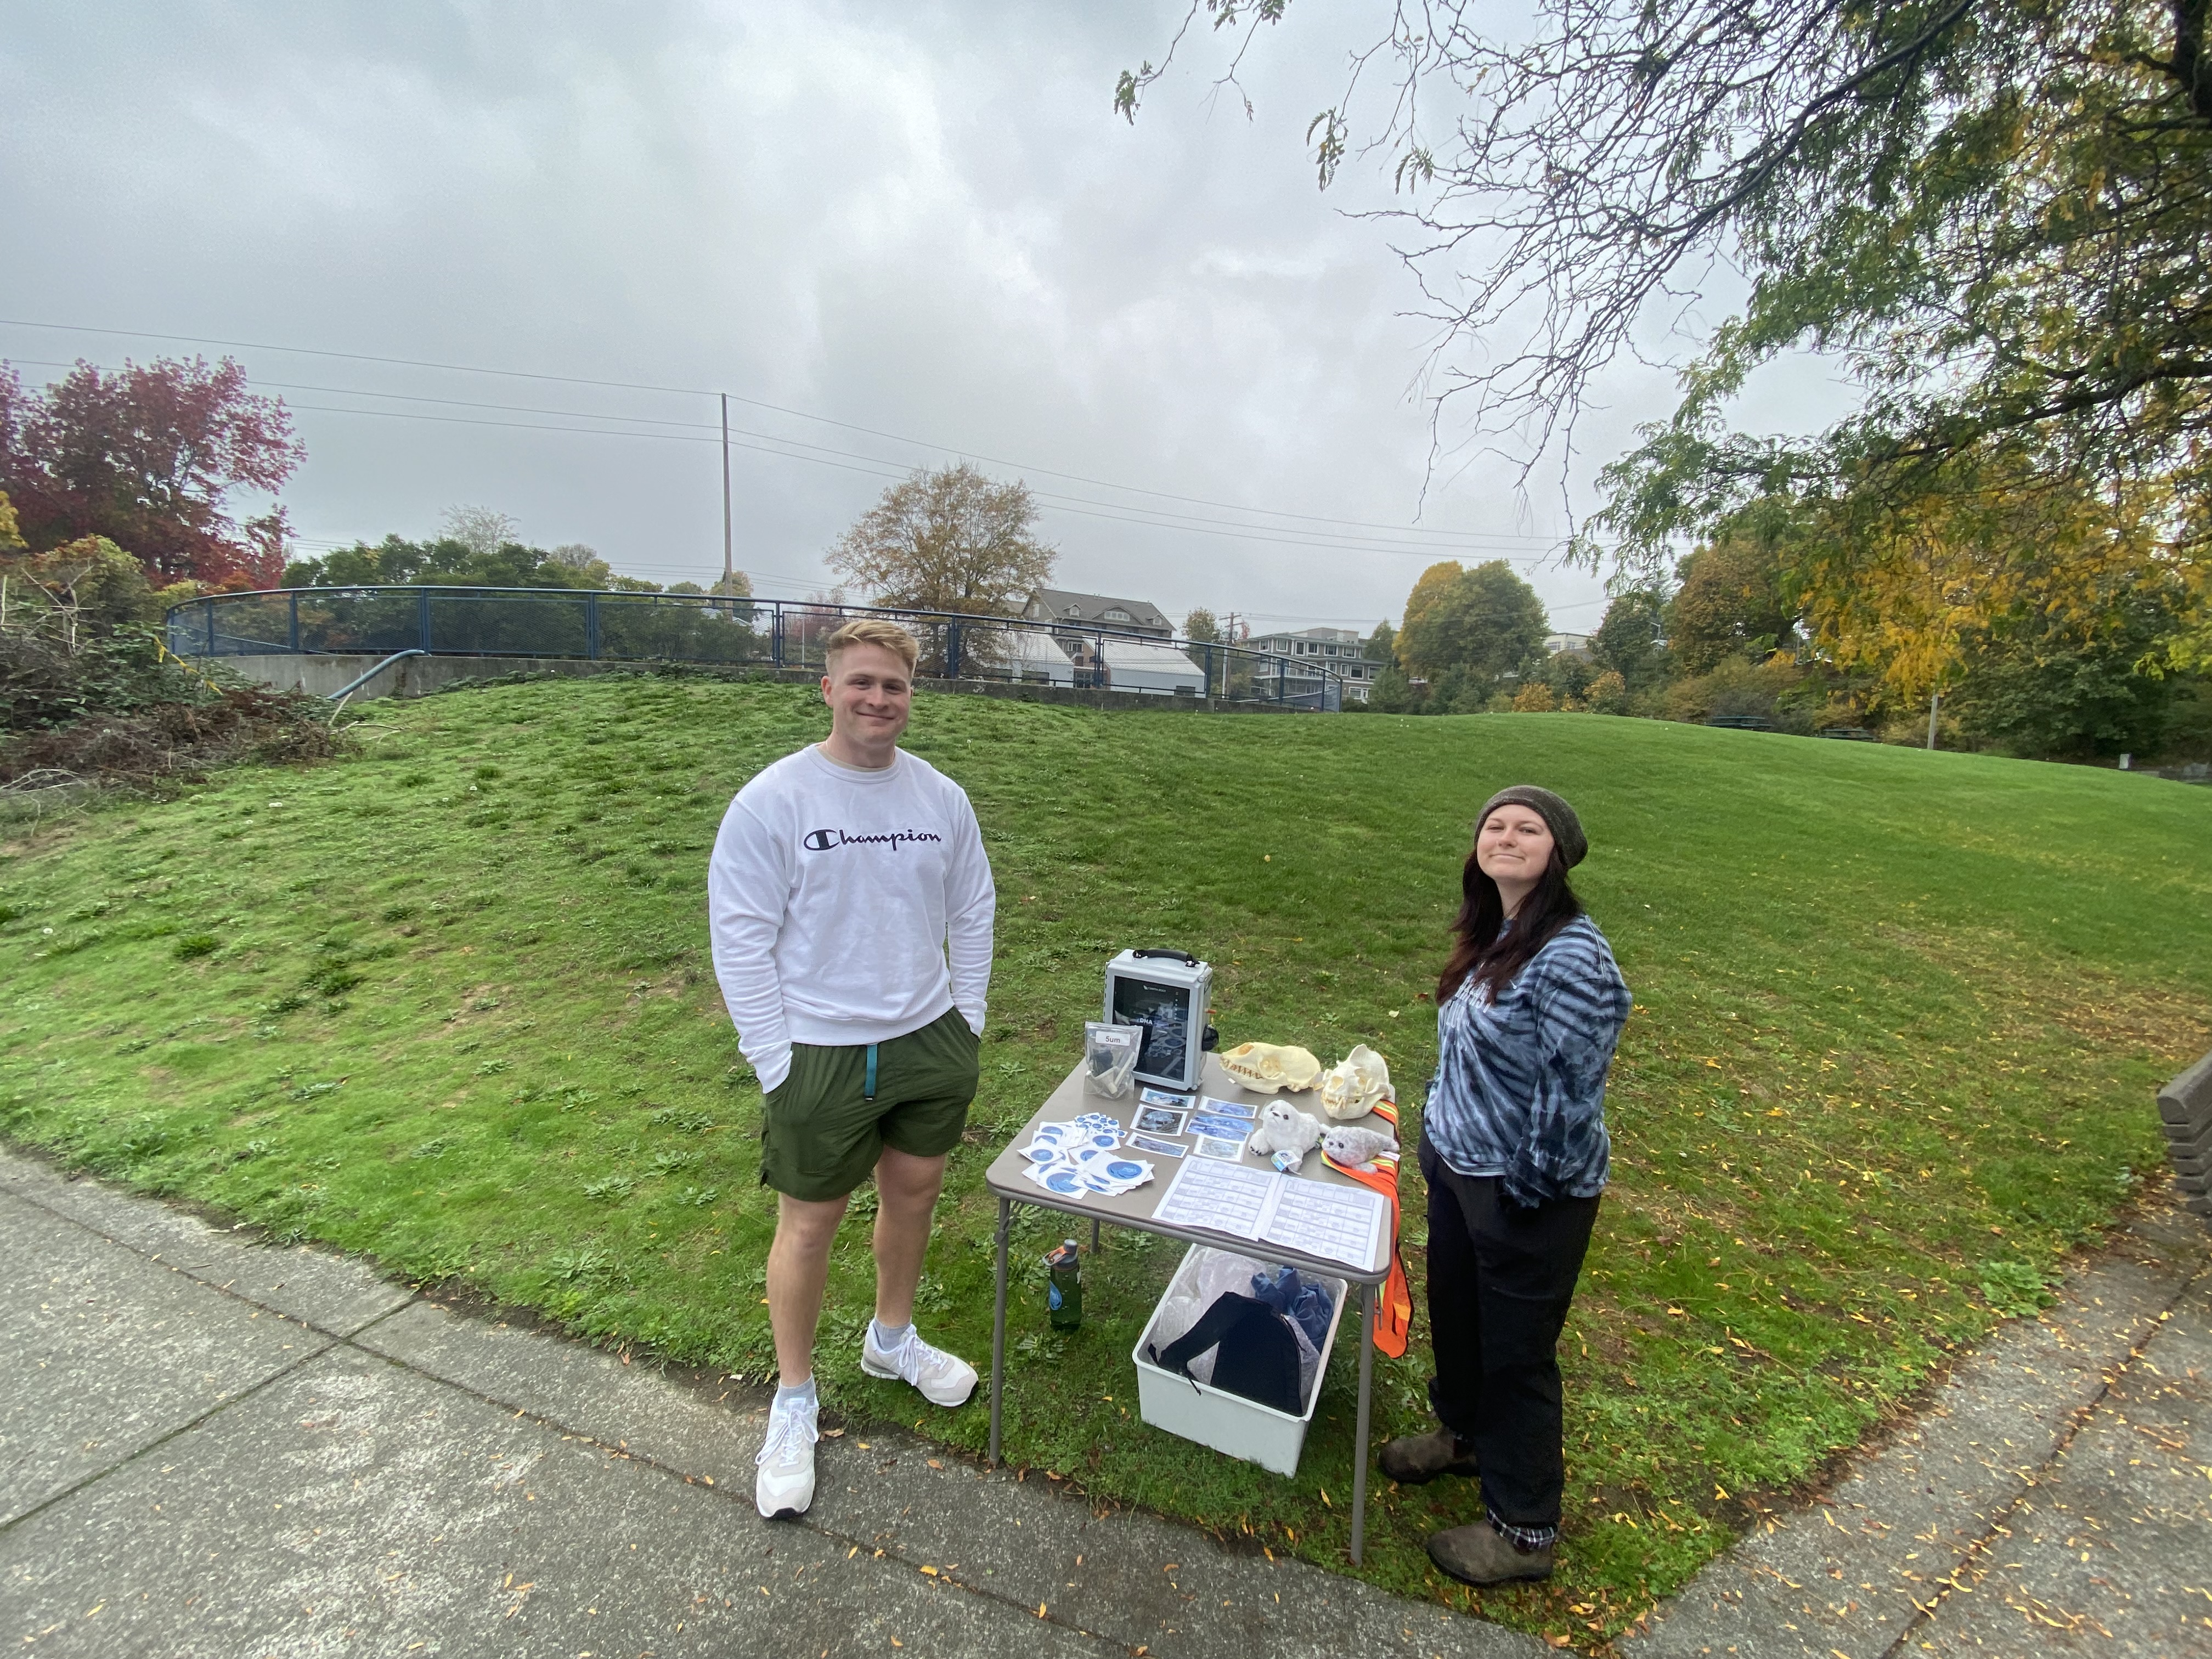 Two students stand on the edge of the sidewalk by a grassy field. The table between them has informational pamphlets.